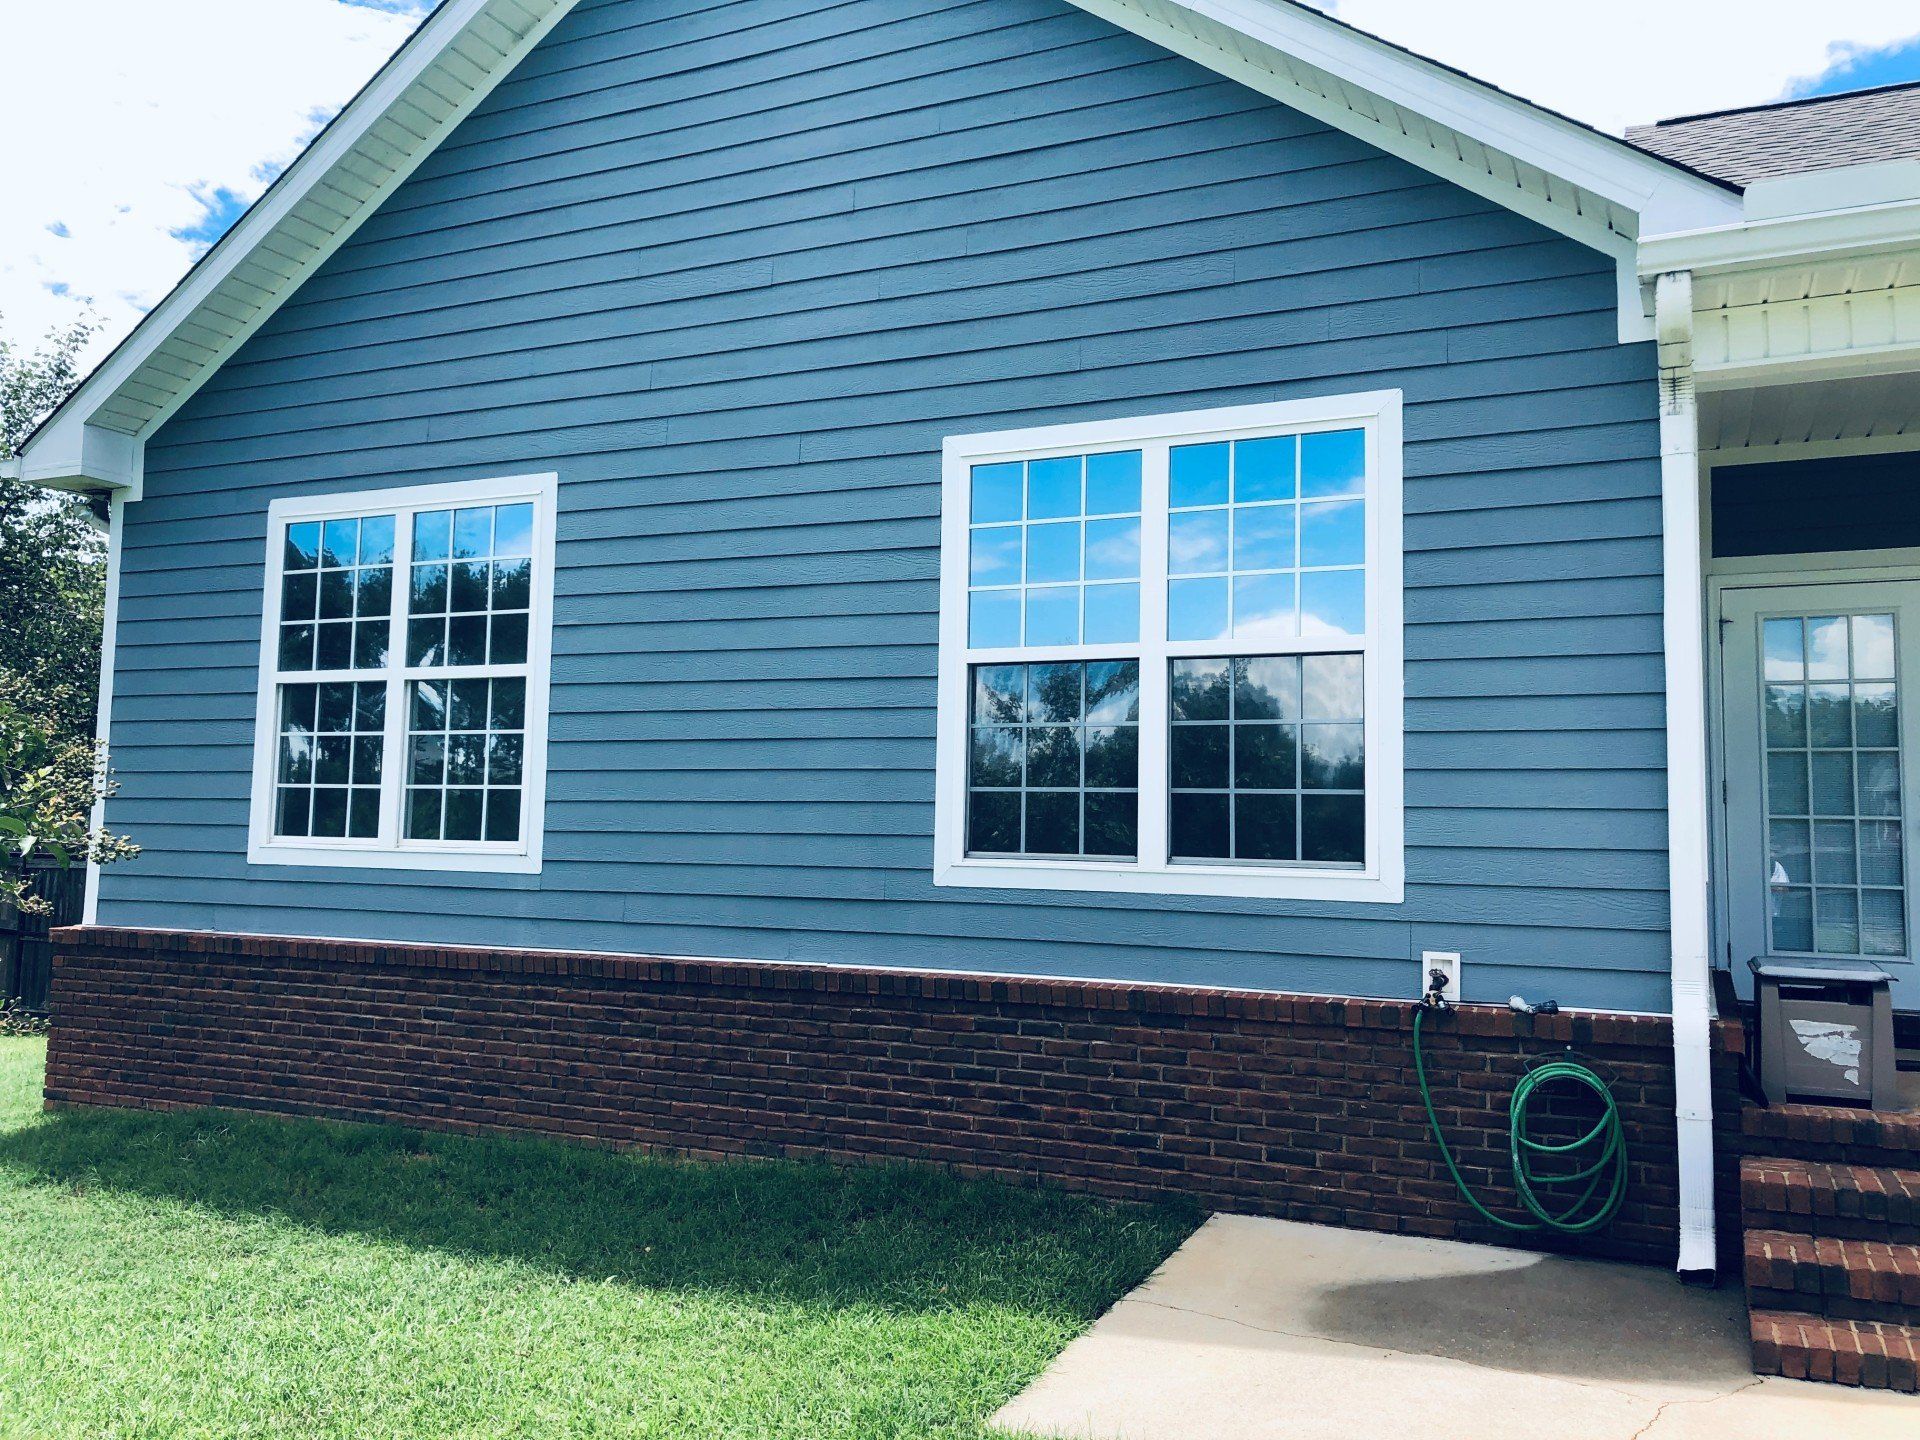 home tint in Enterprise AL - maximum heat rejection was added to this home with spf tint in Enterprise, AL